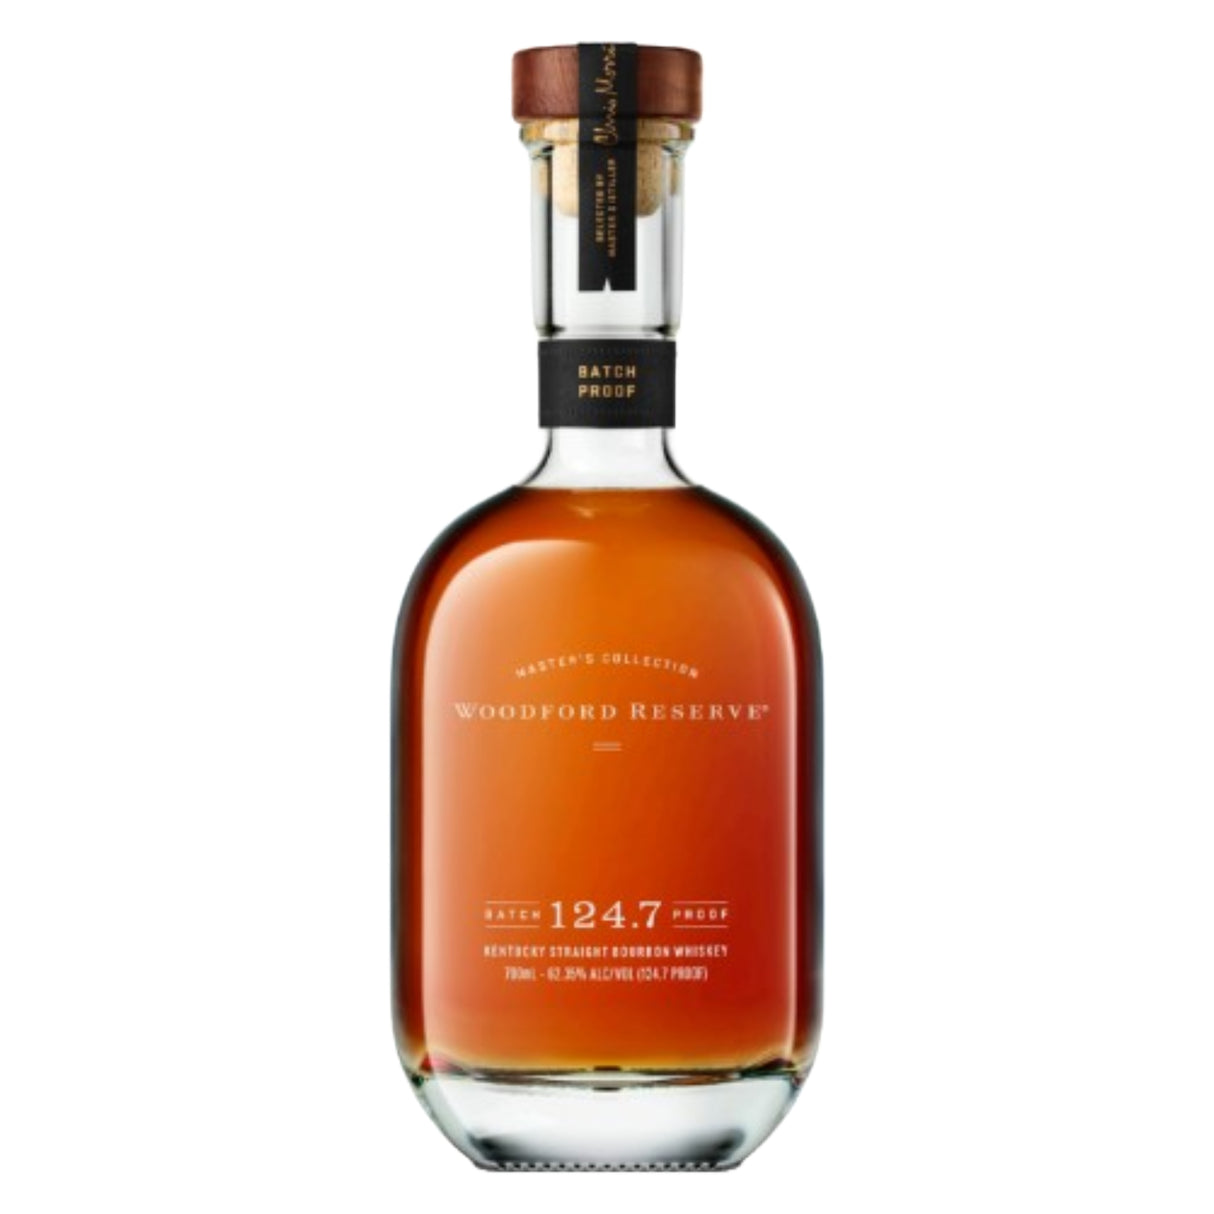 Woodford Reserve Master's Collection Batch Proof Kentucky Straight Bourbon Whiskey - De Wine Spot | DWS - Drams/Whiskey, Wines, Sake